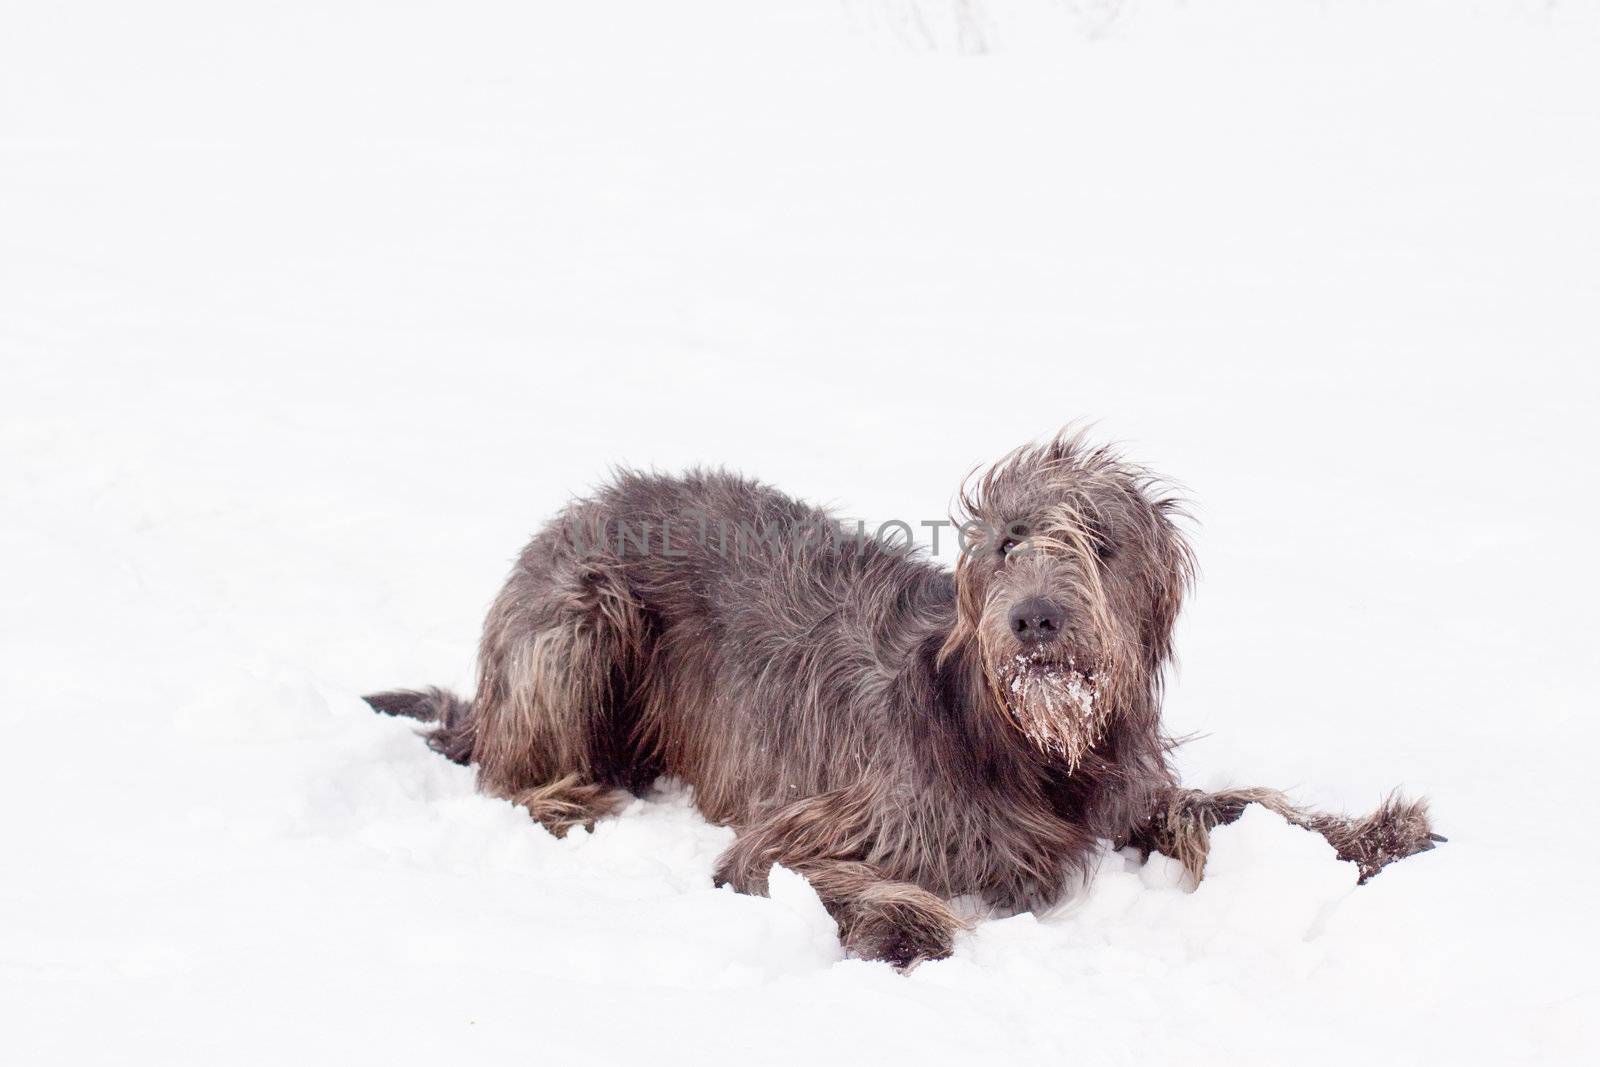 An irish wolfhound lying on a snow-covered field
